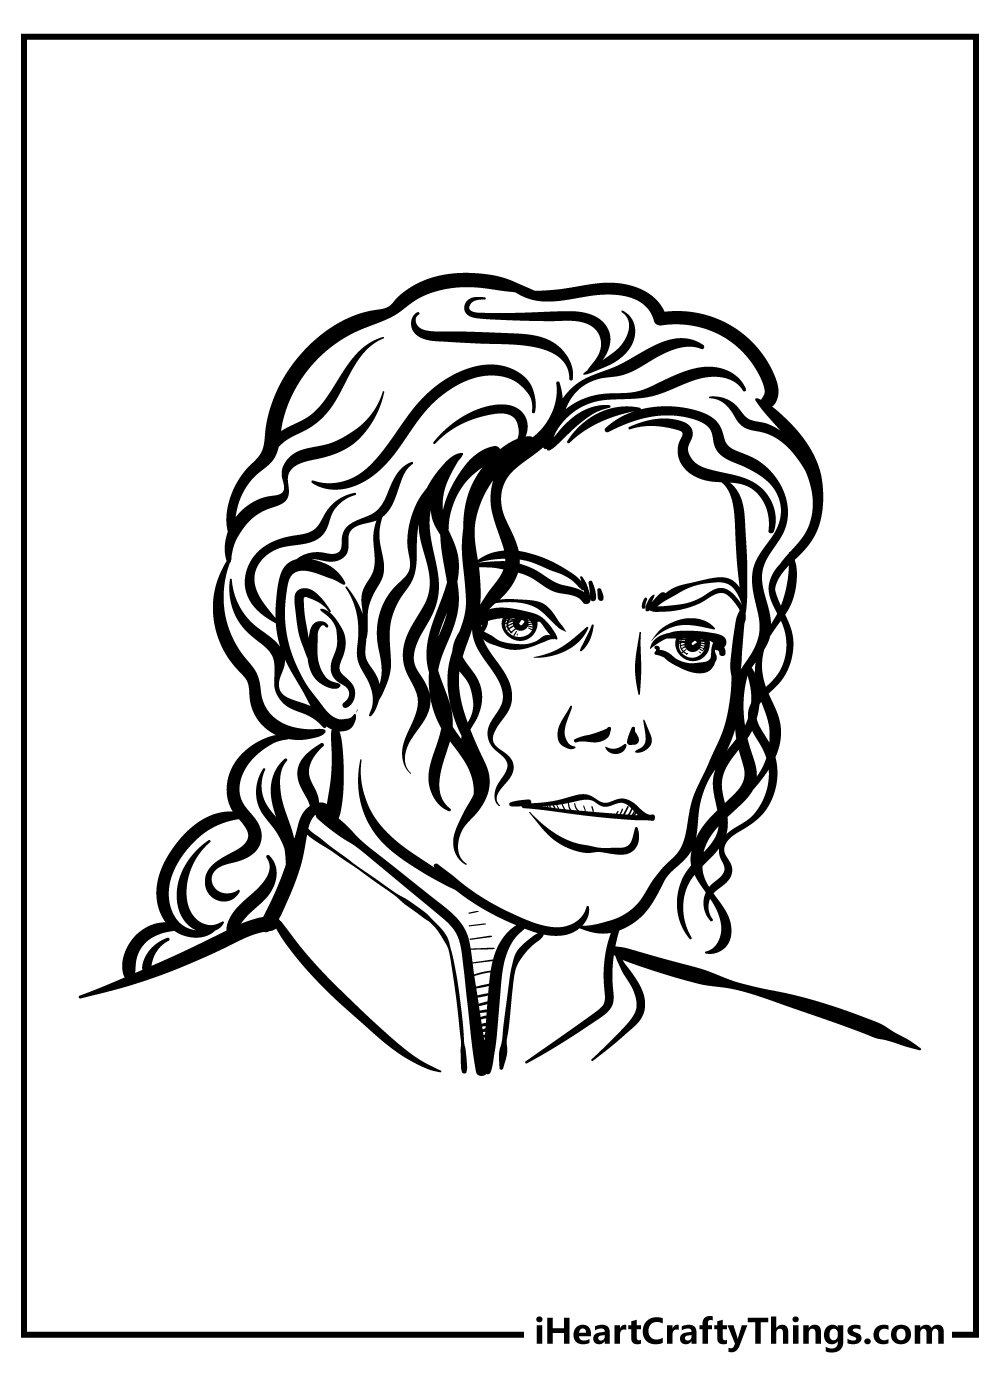 Michael Jackson Coloring Pages for kids free download